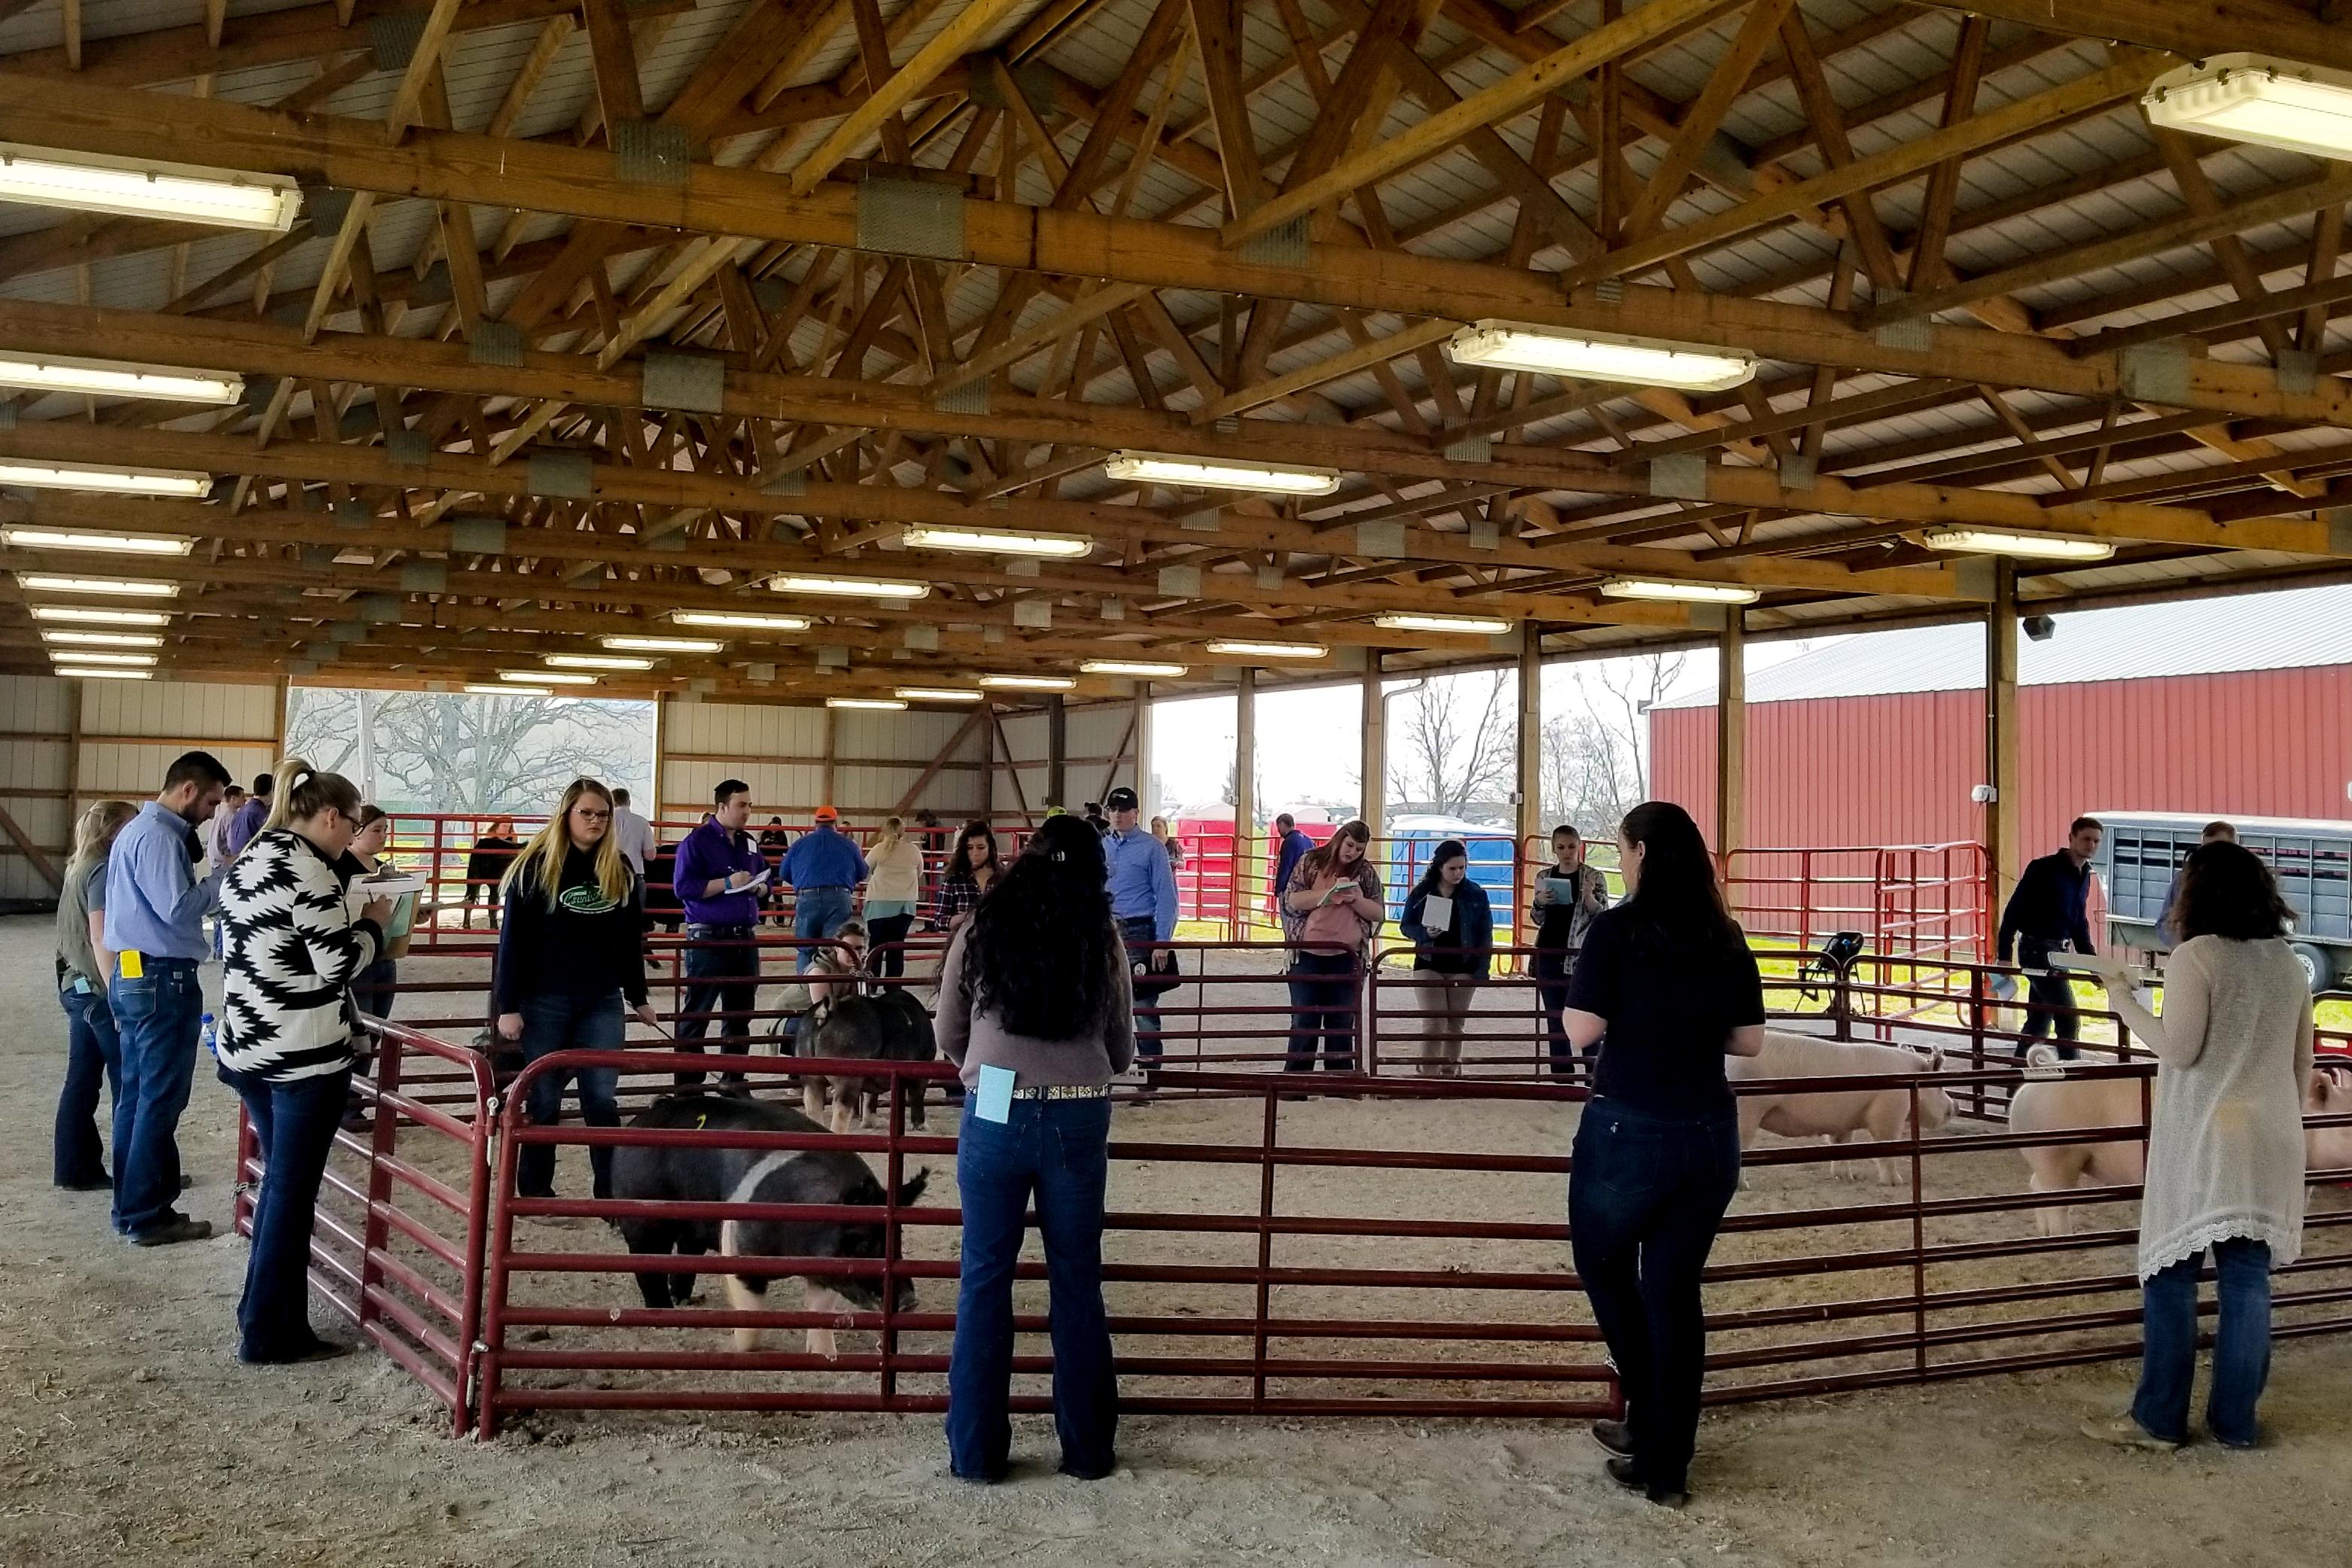 Students studied sheep, swine and cattle in categories including market animal evaluation, animal selection, livestock judging and oral reasoning. 